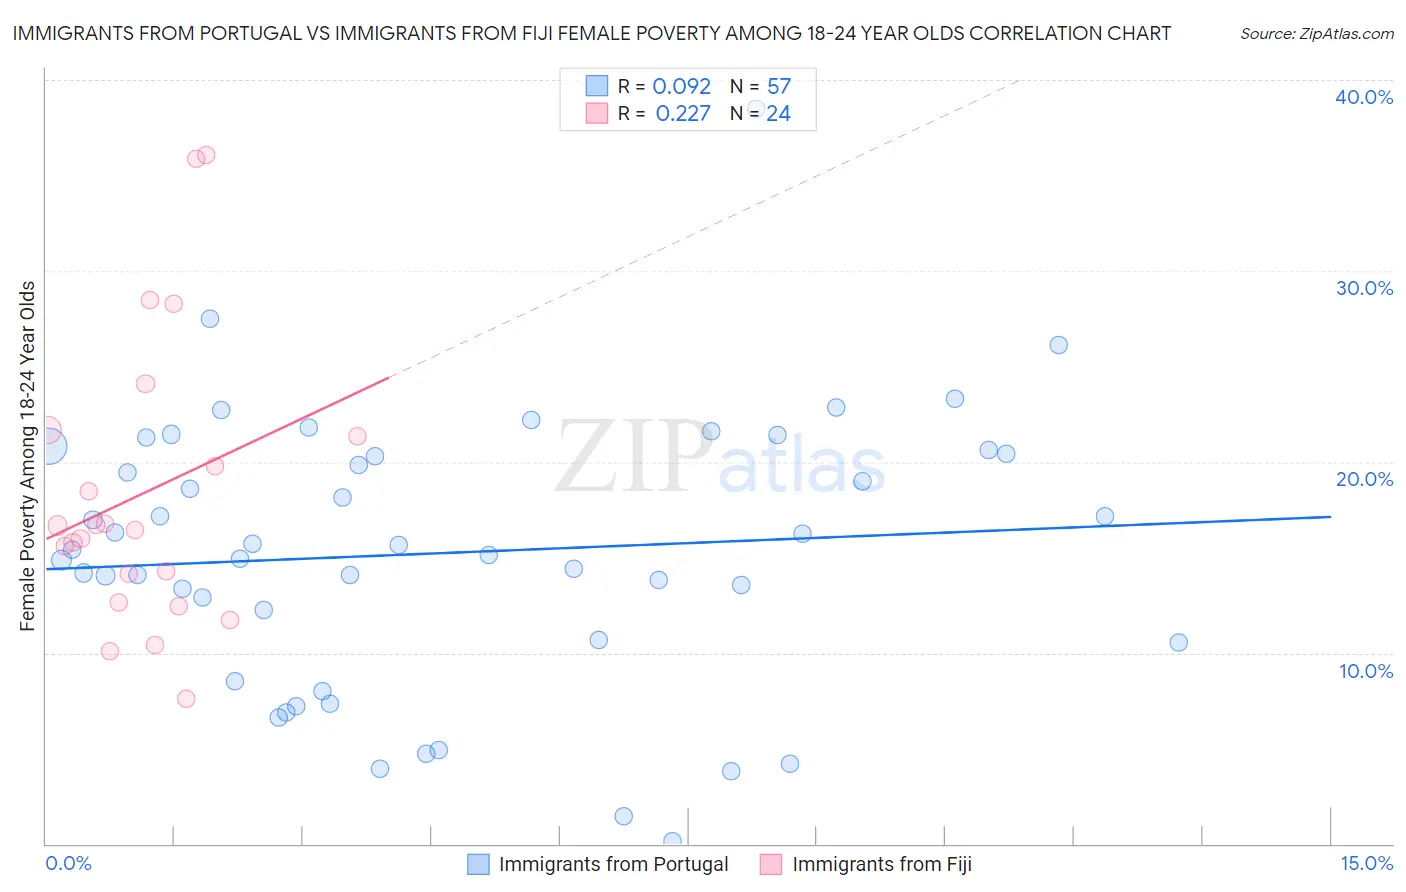 Immigrants from Portugal vs Immigrants from Fiji Female Poverty Among 18-24 Year Olds